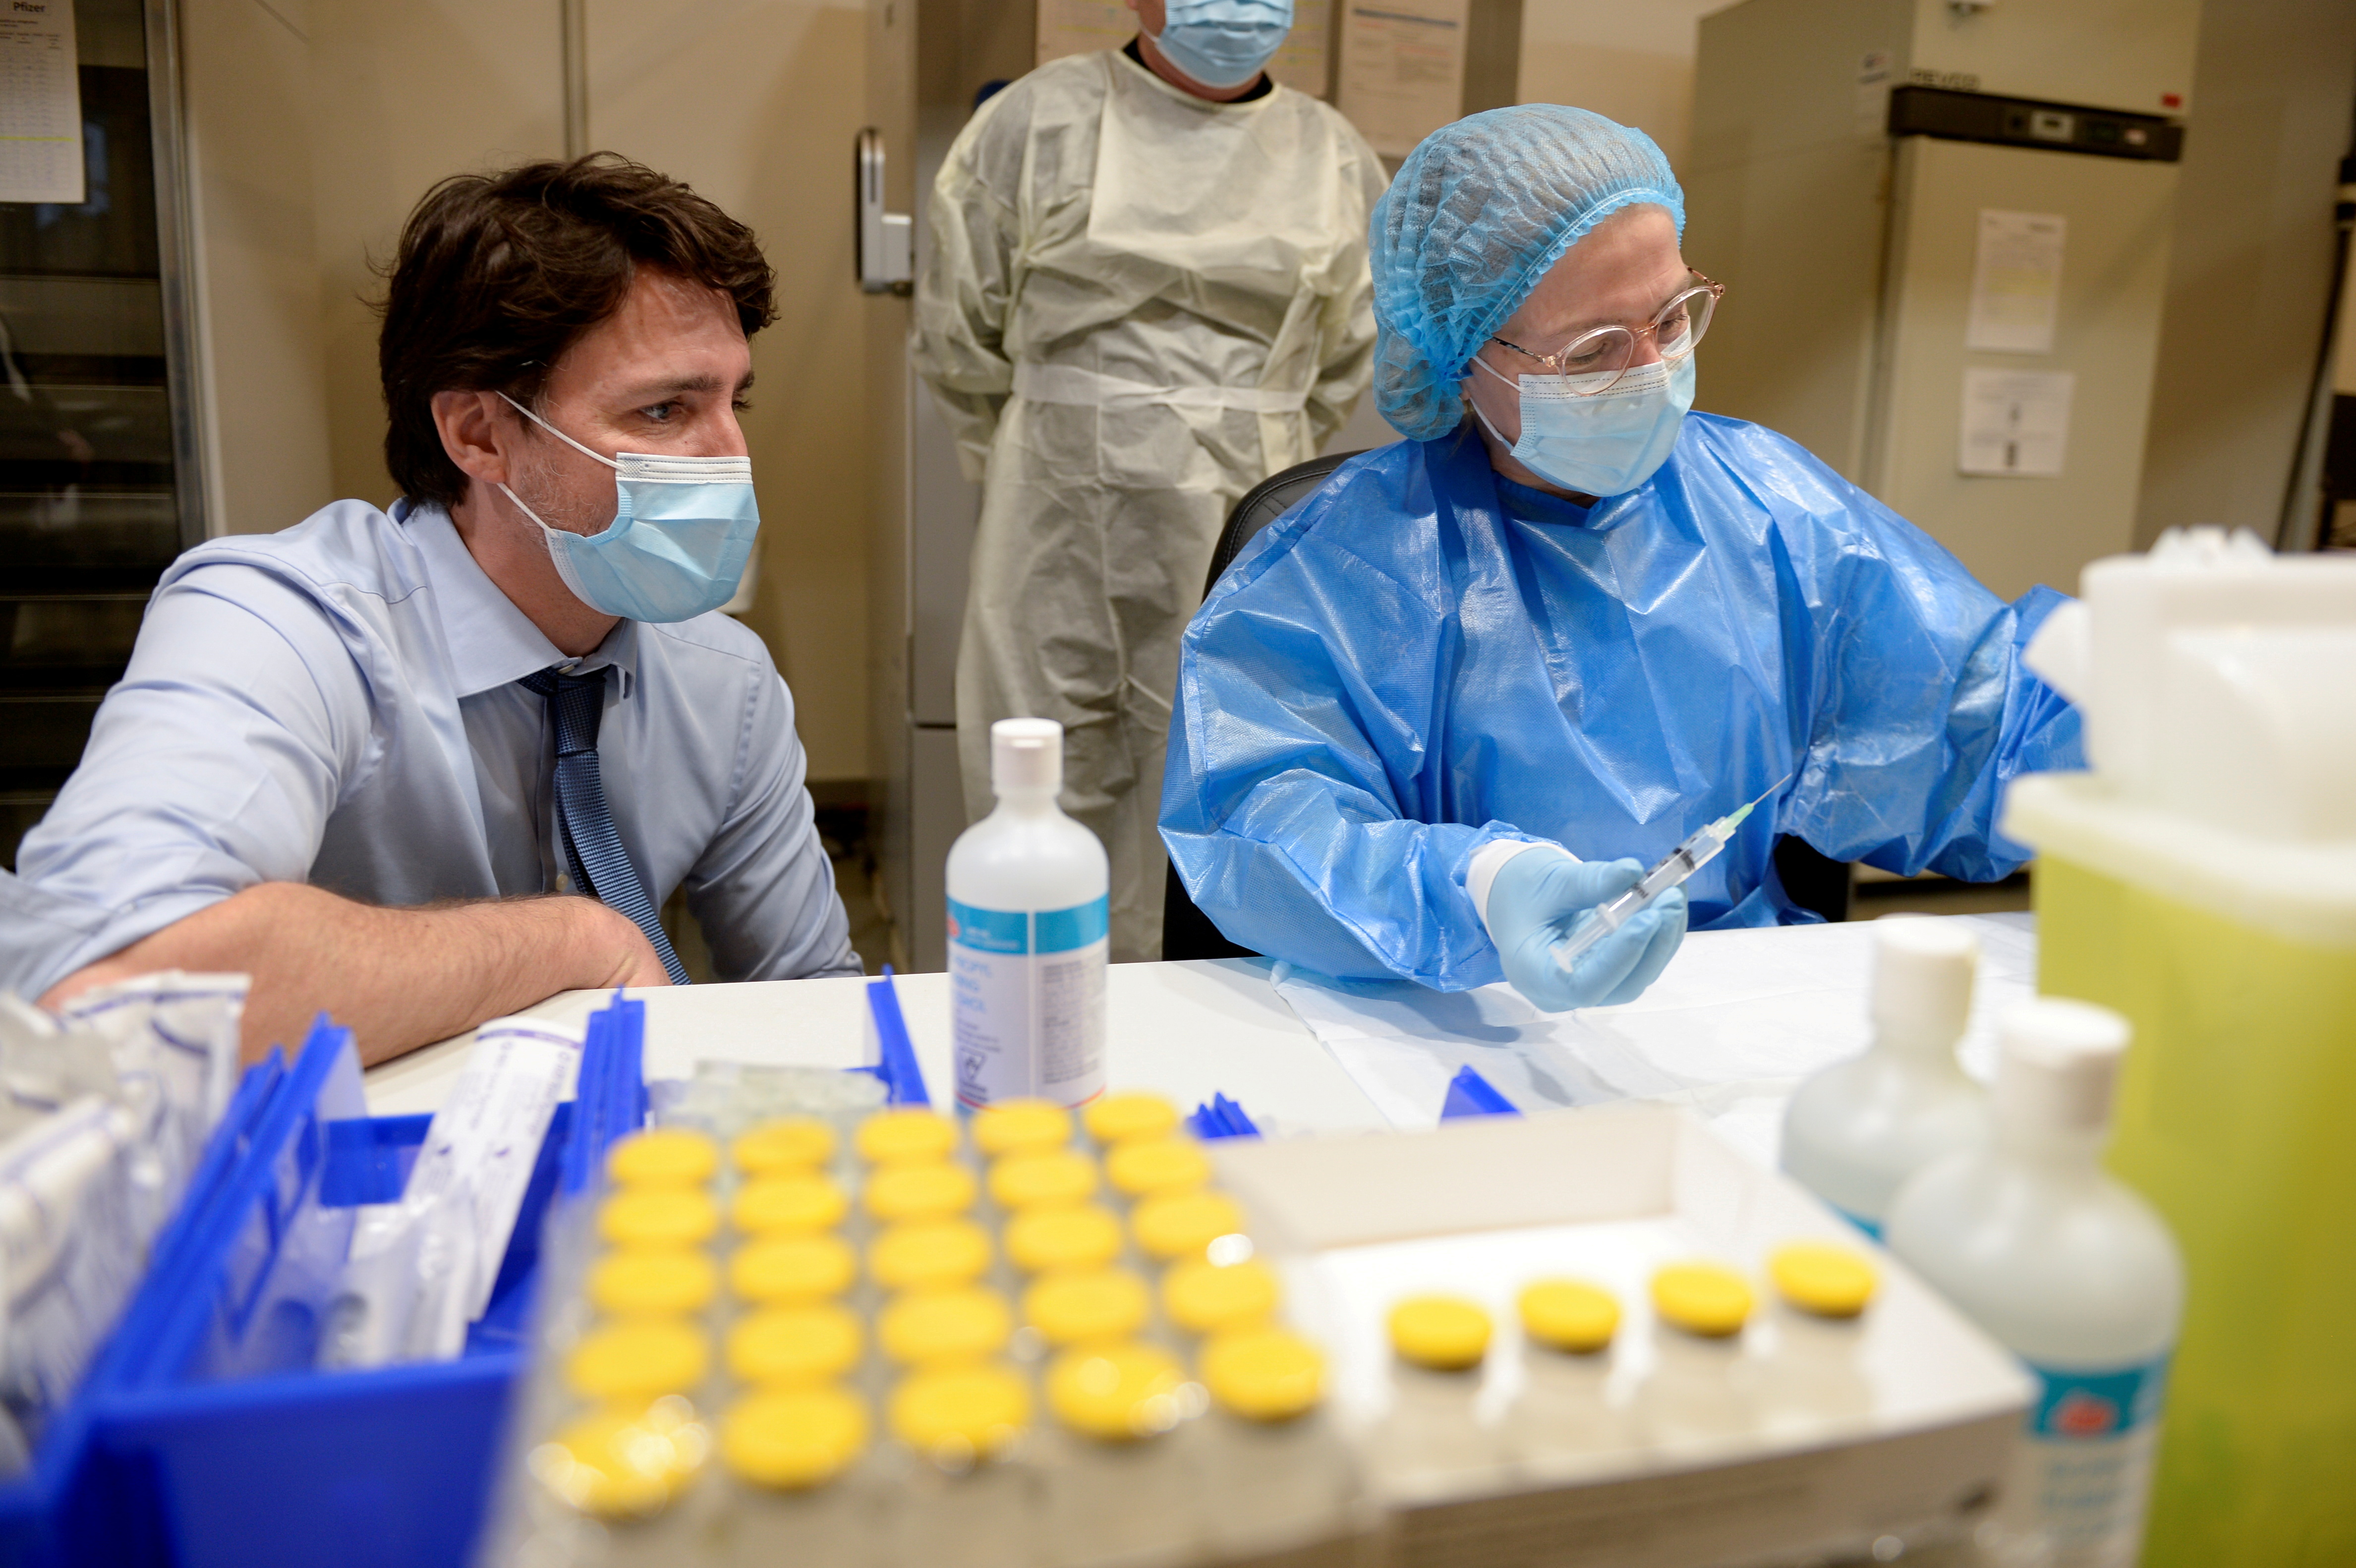 Canada's Prime Minister Trudeau visits a vaccination clinic in Montreal